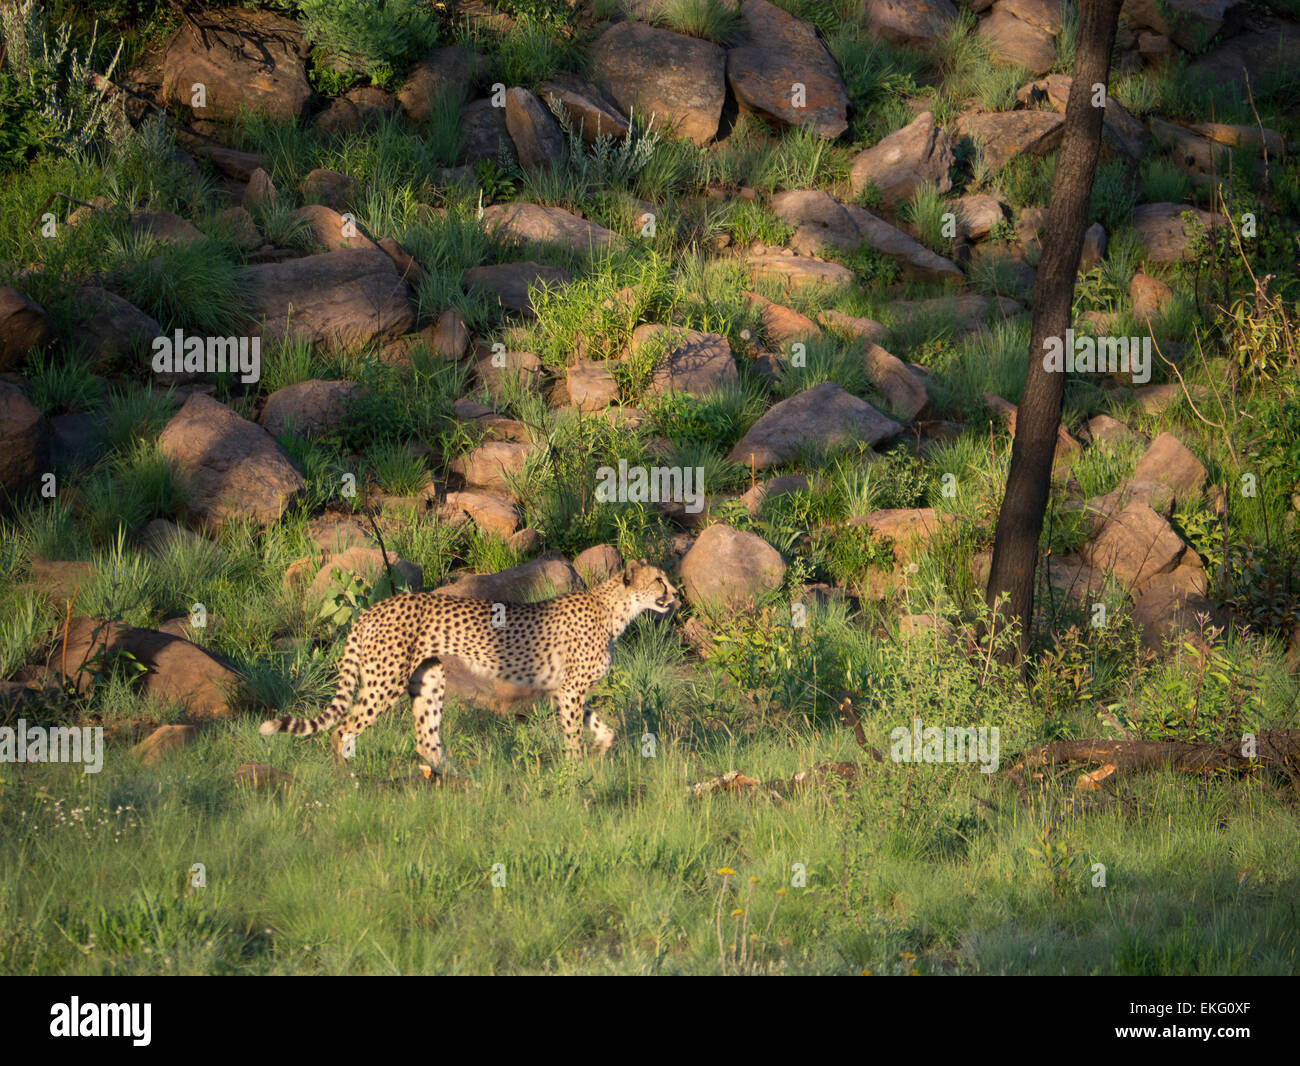 Cheetah hunting in evening, Welgevonden Game Reserve, South Africa Stock Photo